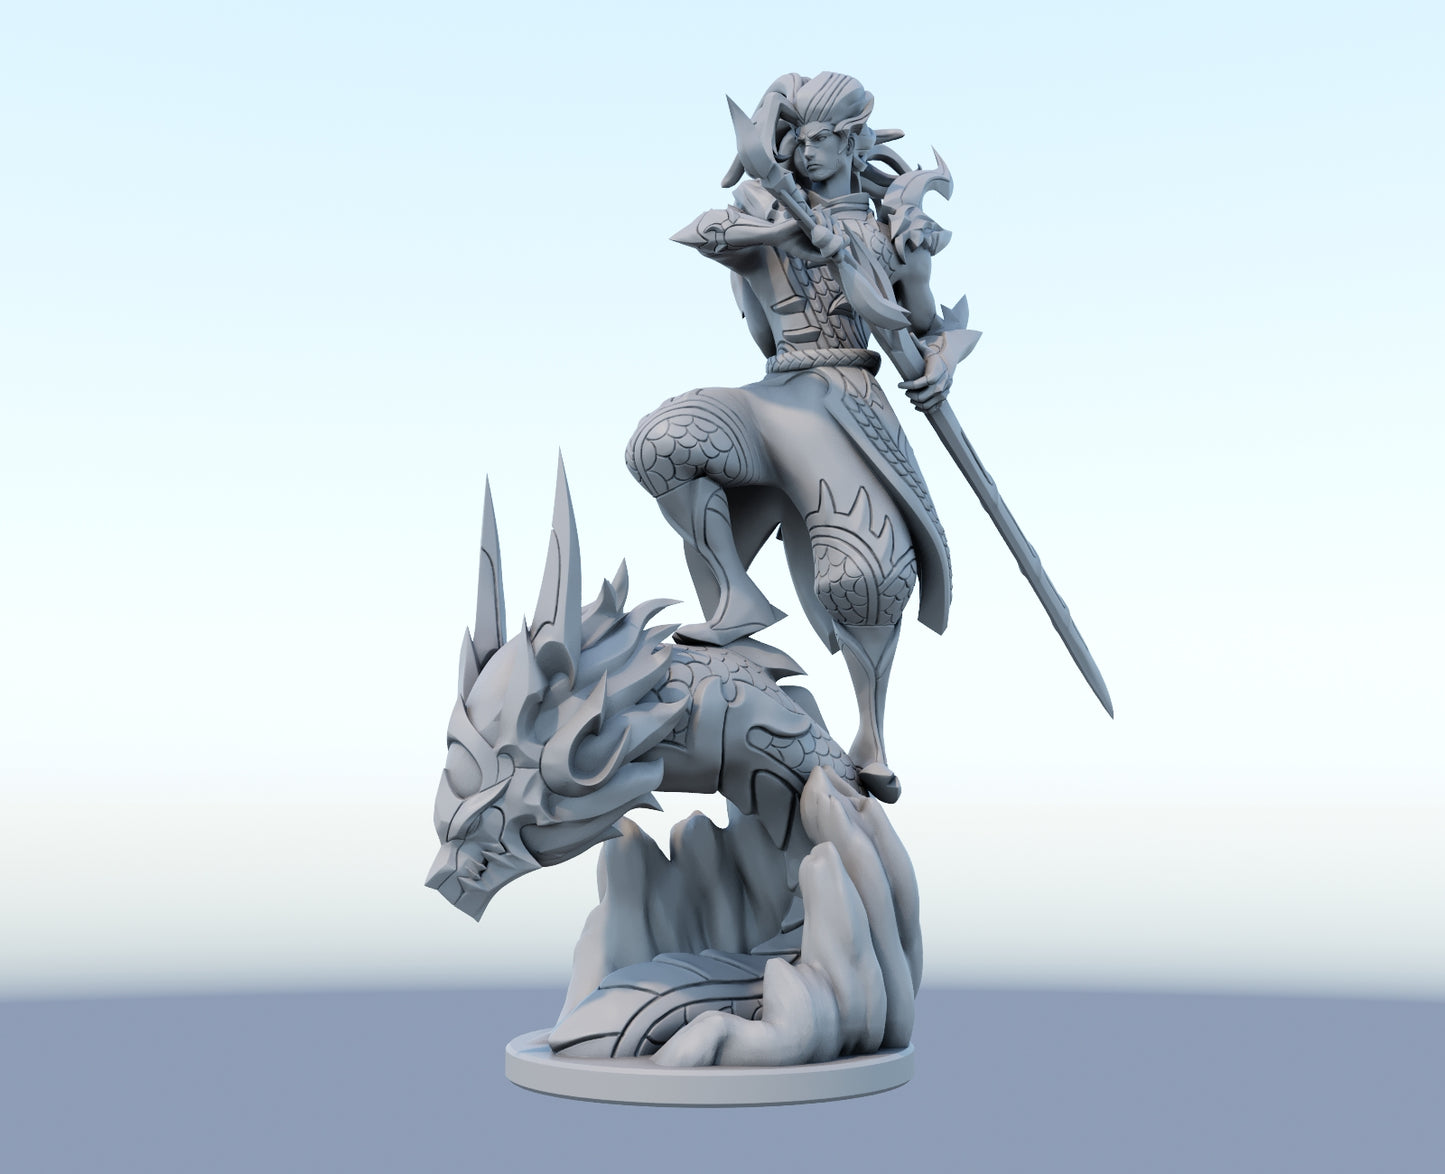 Yasuo Truth Dragon 3D-printed League of Legends champion figure. Decorate your gaming setup or home with your favorite League of Legends champion! Choose between the unpainted version, perfect for you to paint yourself, or the hand-painted version by a professional painter. Order your figure today!